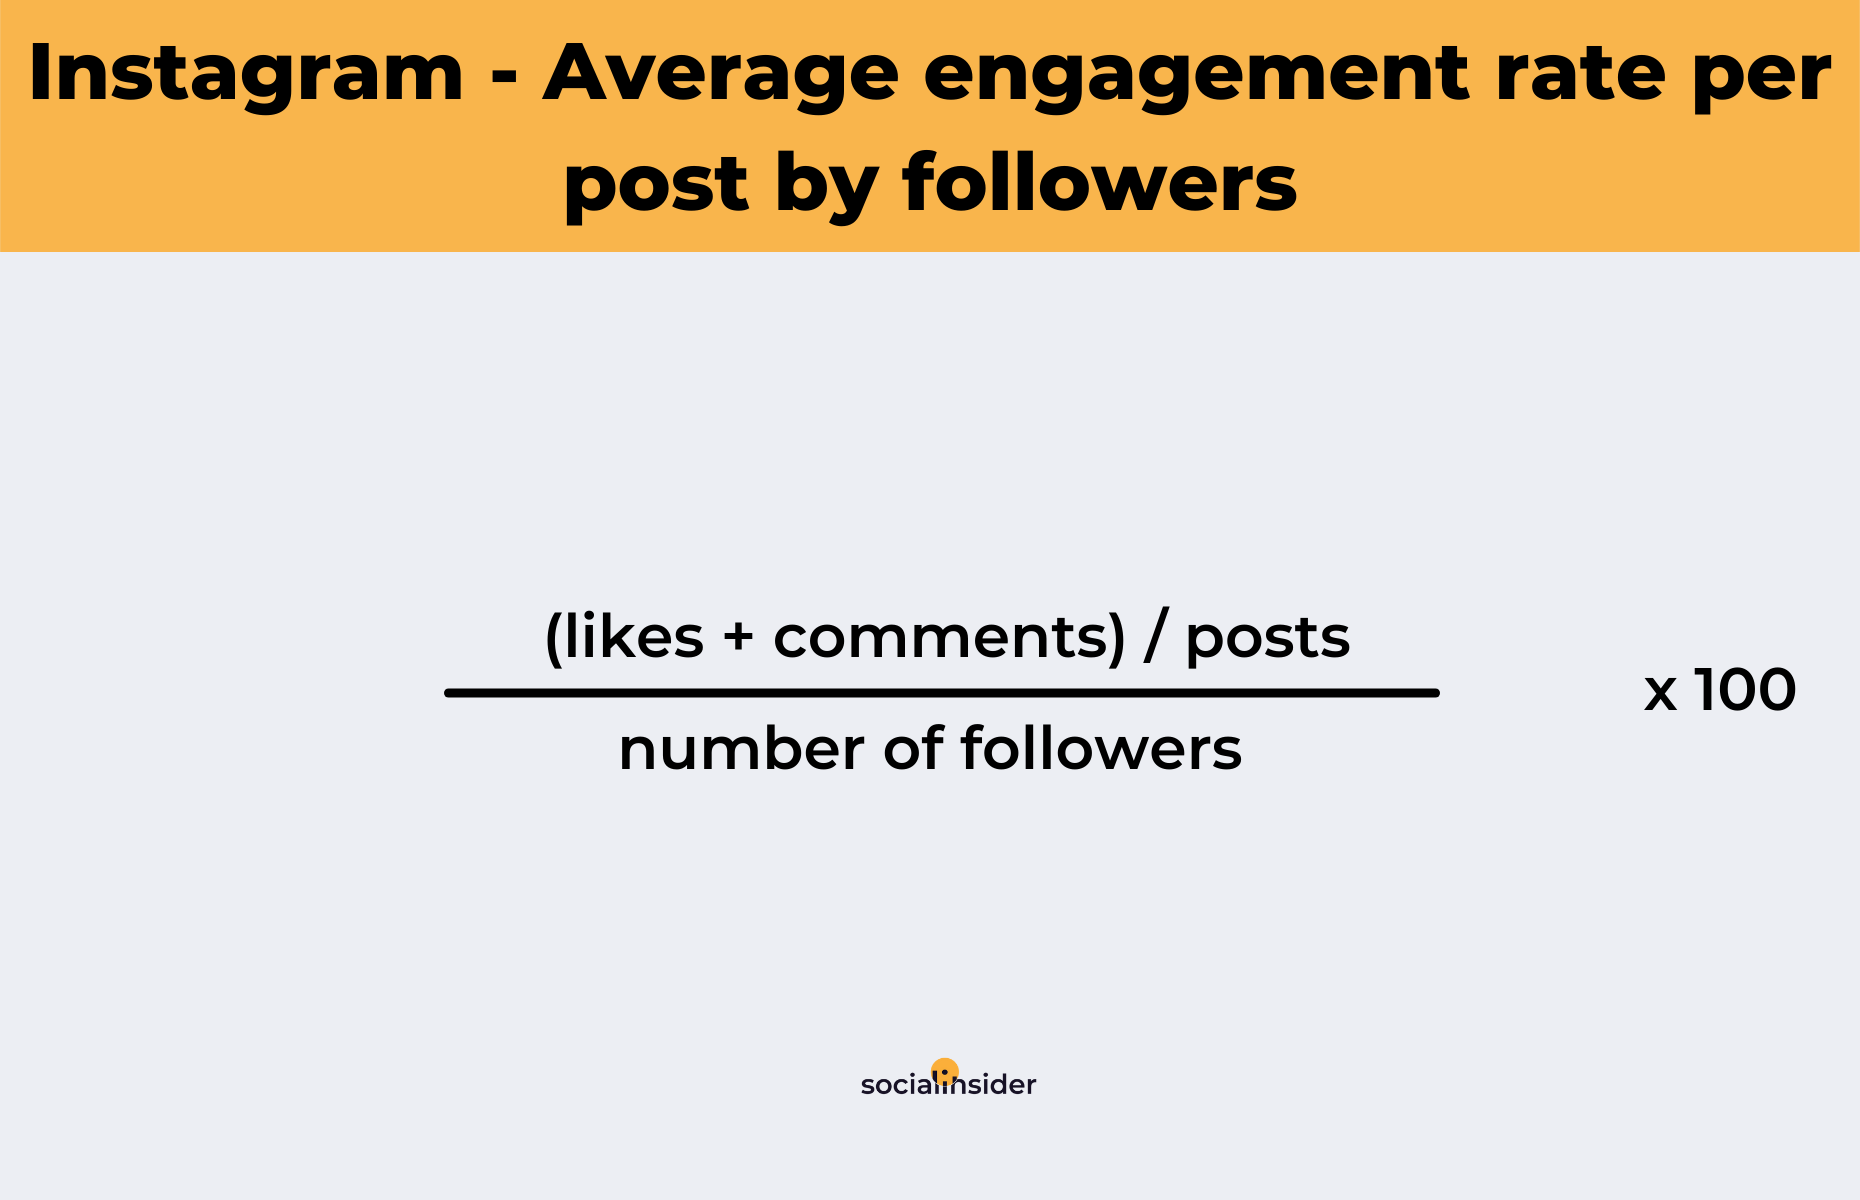 How to calculate the average engagement rate per post by followers on Instagram